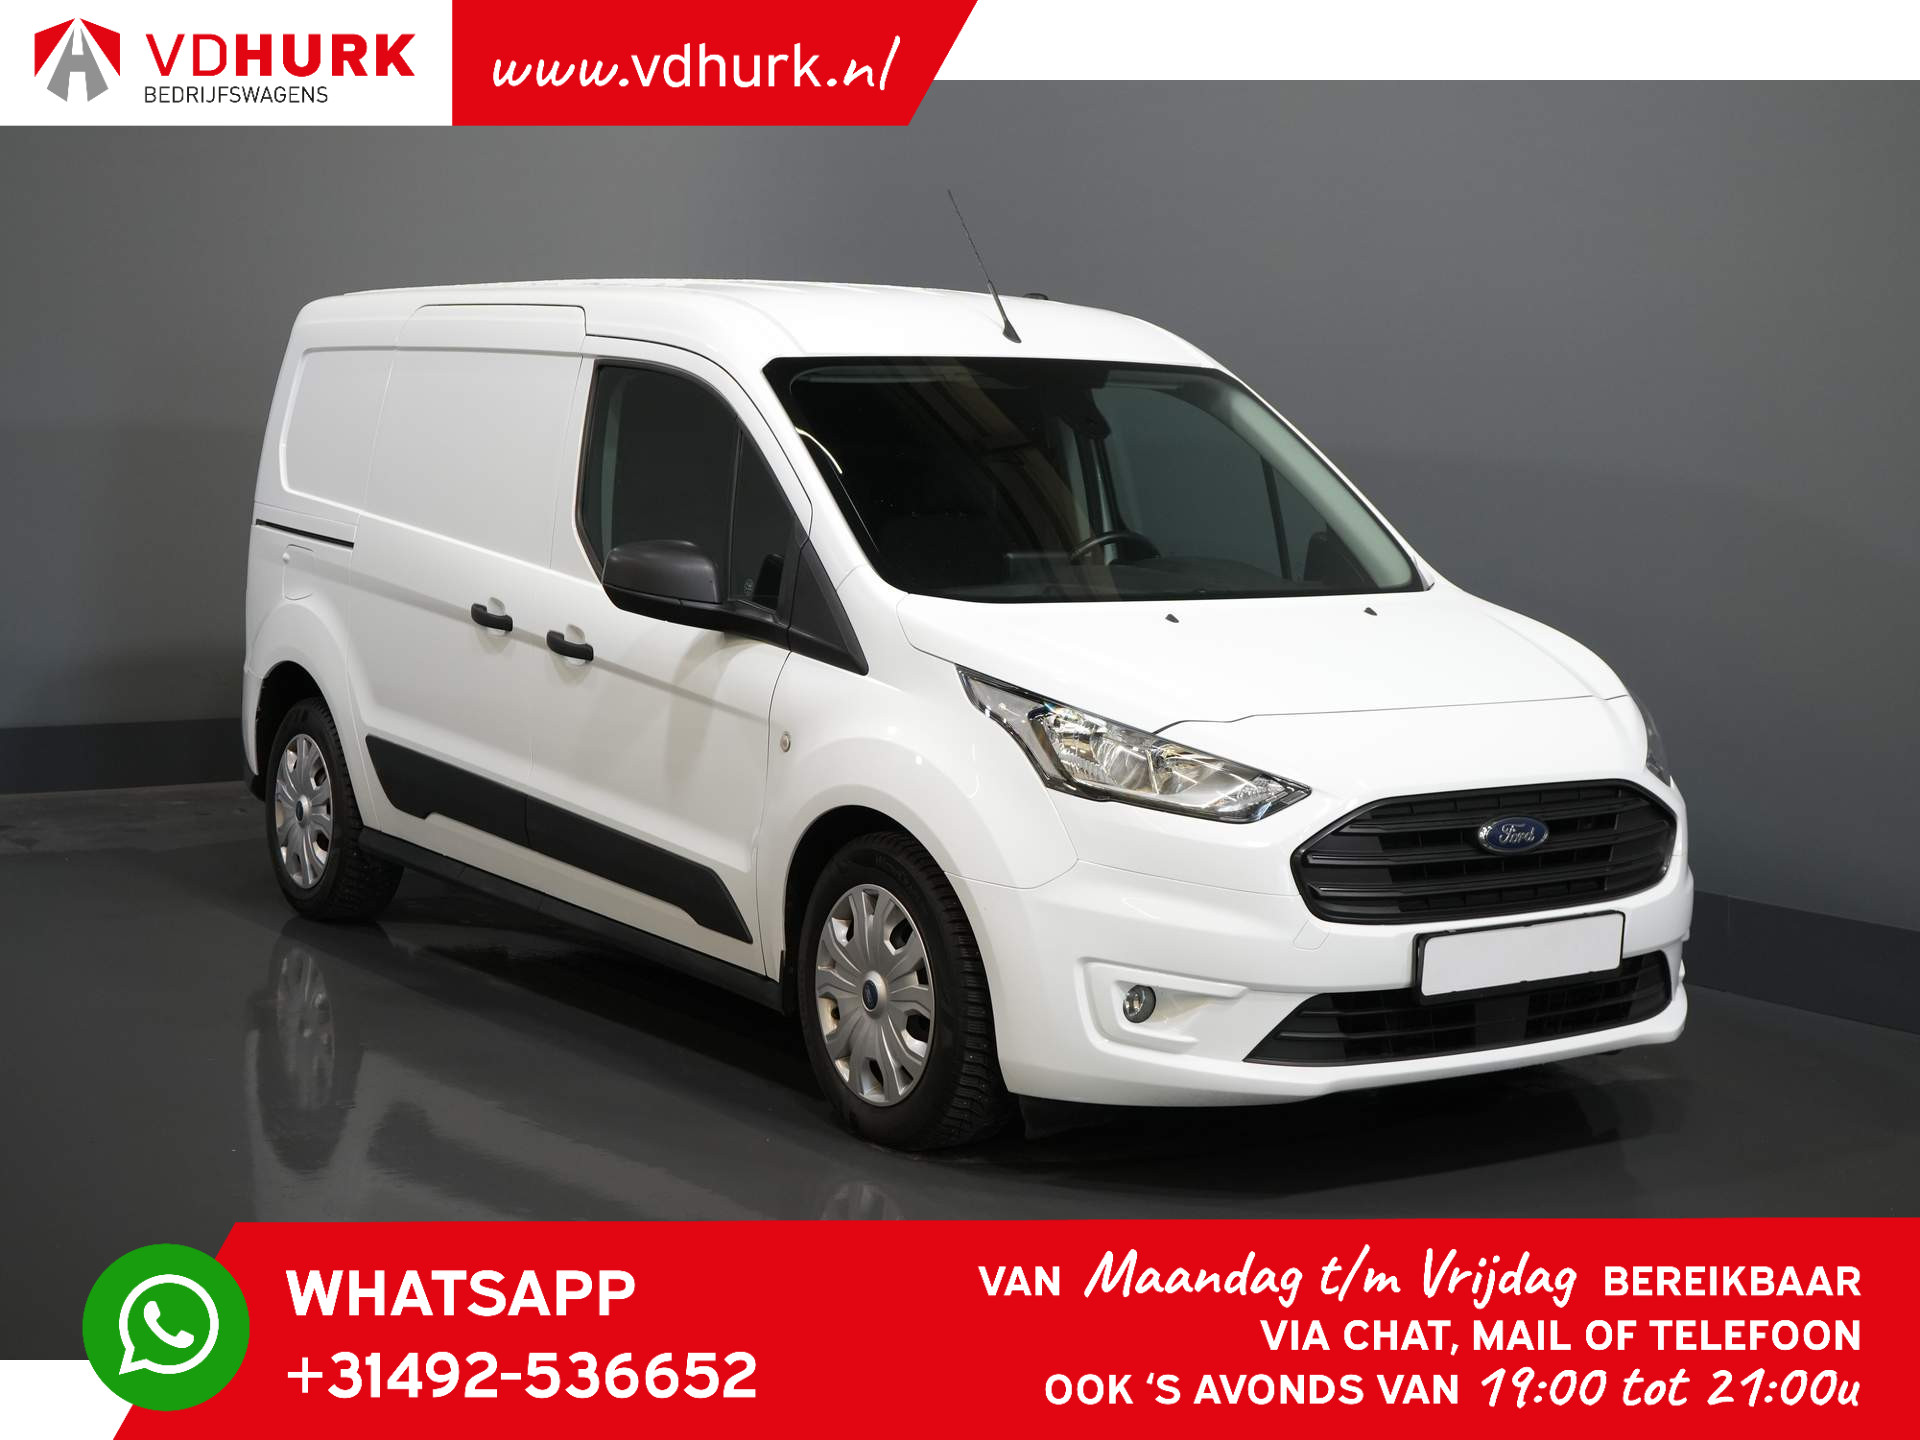 Ford Transit Connect 1.5 TDCI 100 Pk Aut. L2 Trend 3pers./ Standkachel/ Stoelverw./ Carplay/ PDC/ Camera/ Cruise/ Airco